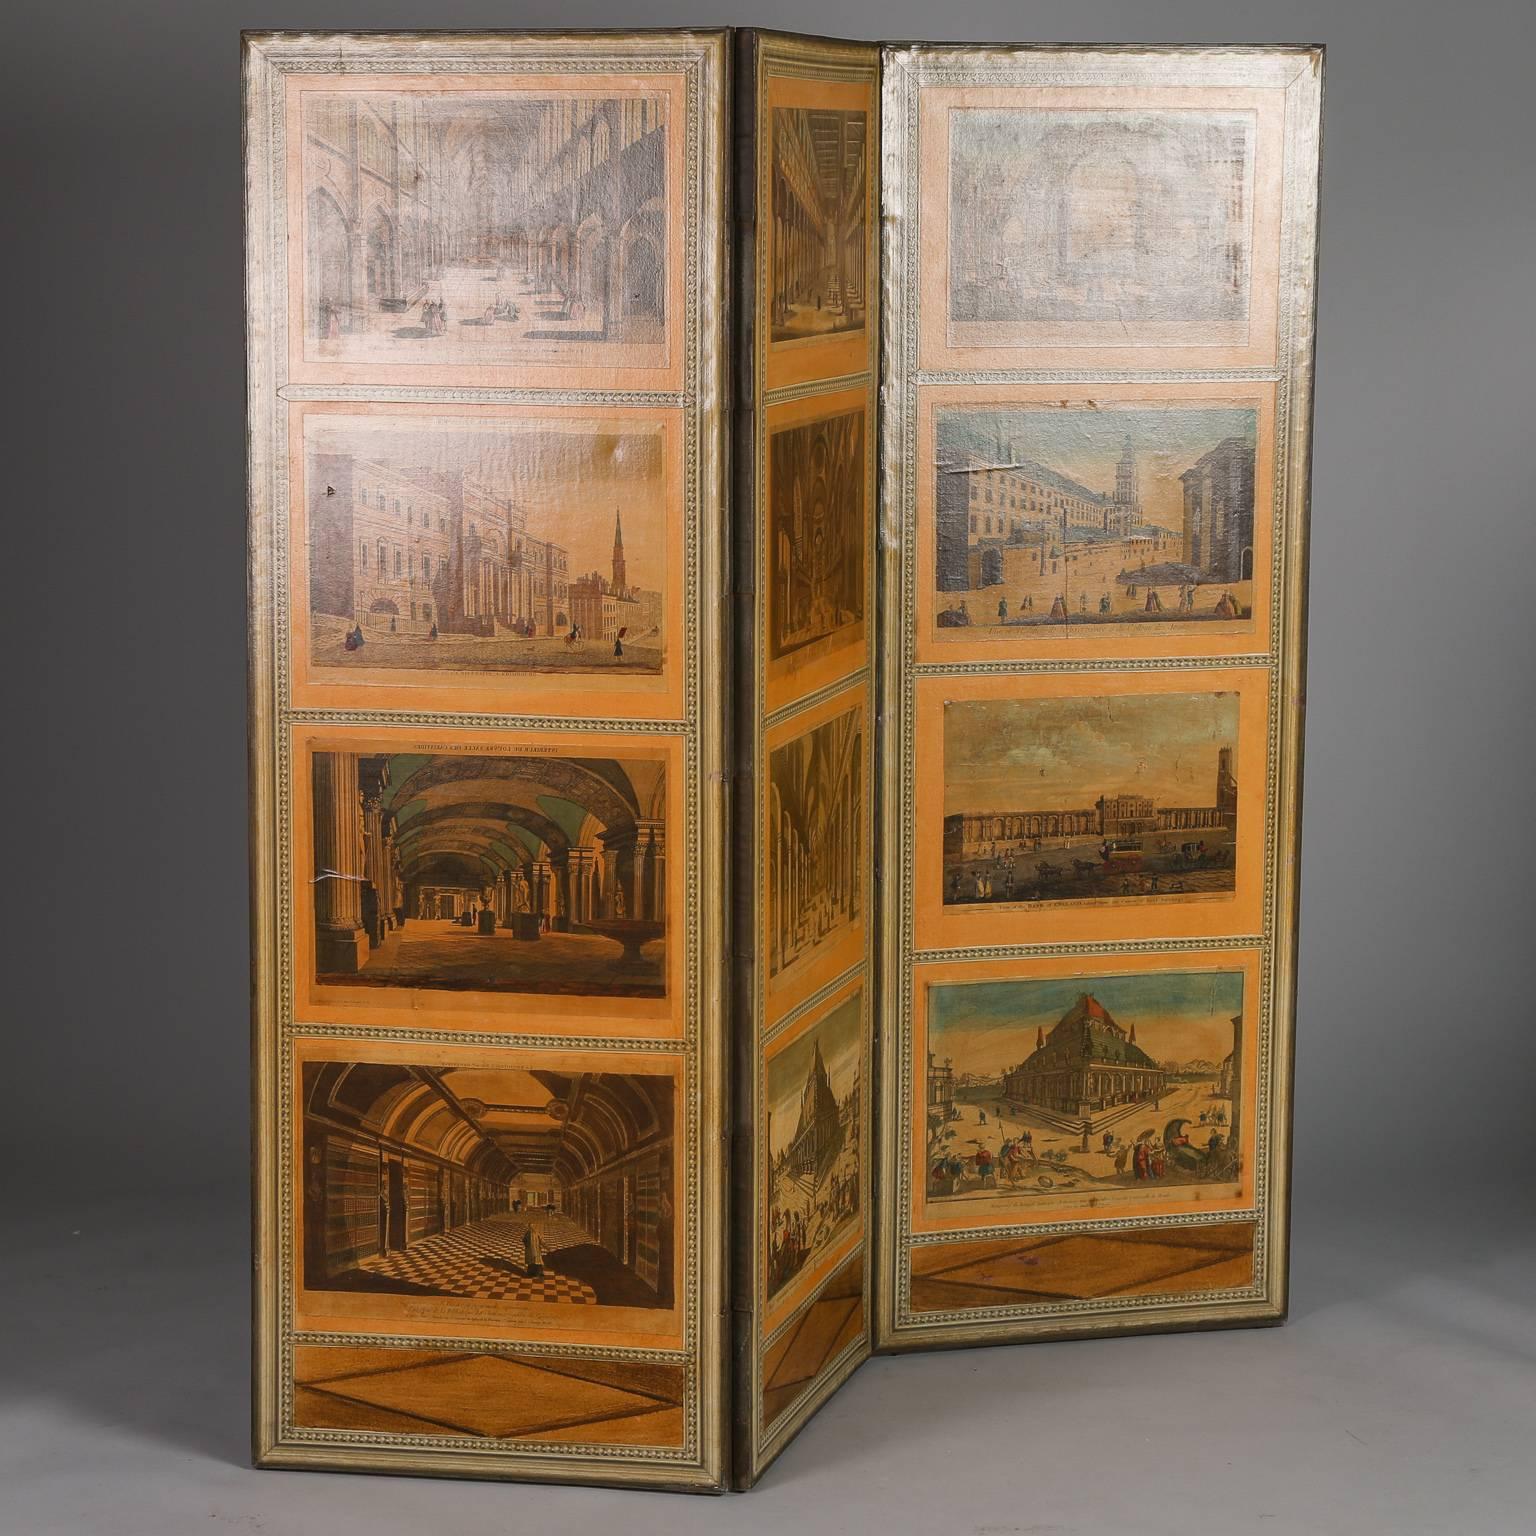 French Directoire style three panel folding screen decorated with antique prints of European architectural scenes, circa 1950s. Wood framed panels have been covered in stretched and painted canvas with antique decoupaged prints of classic European